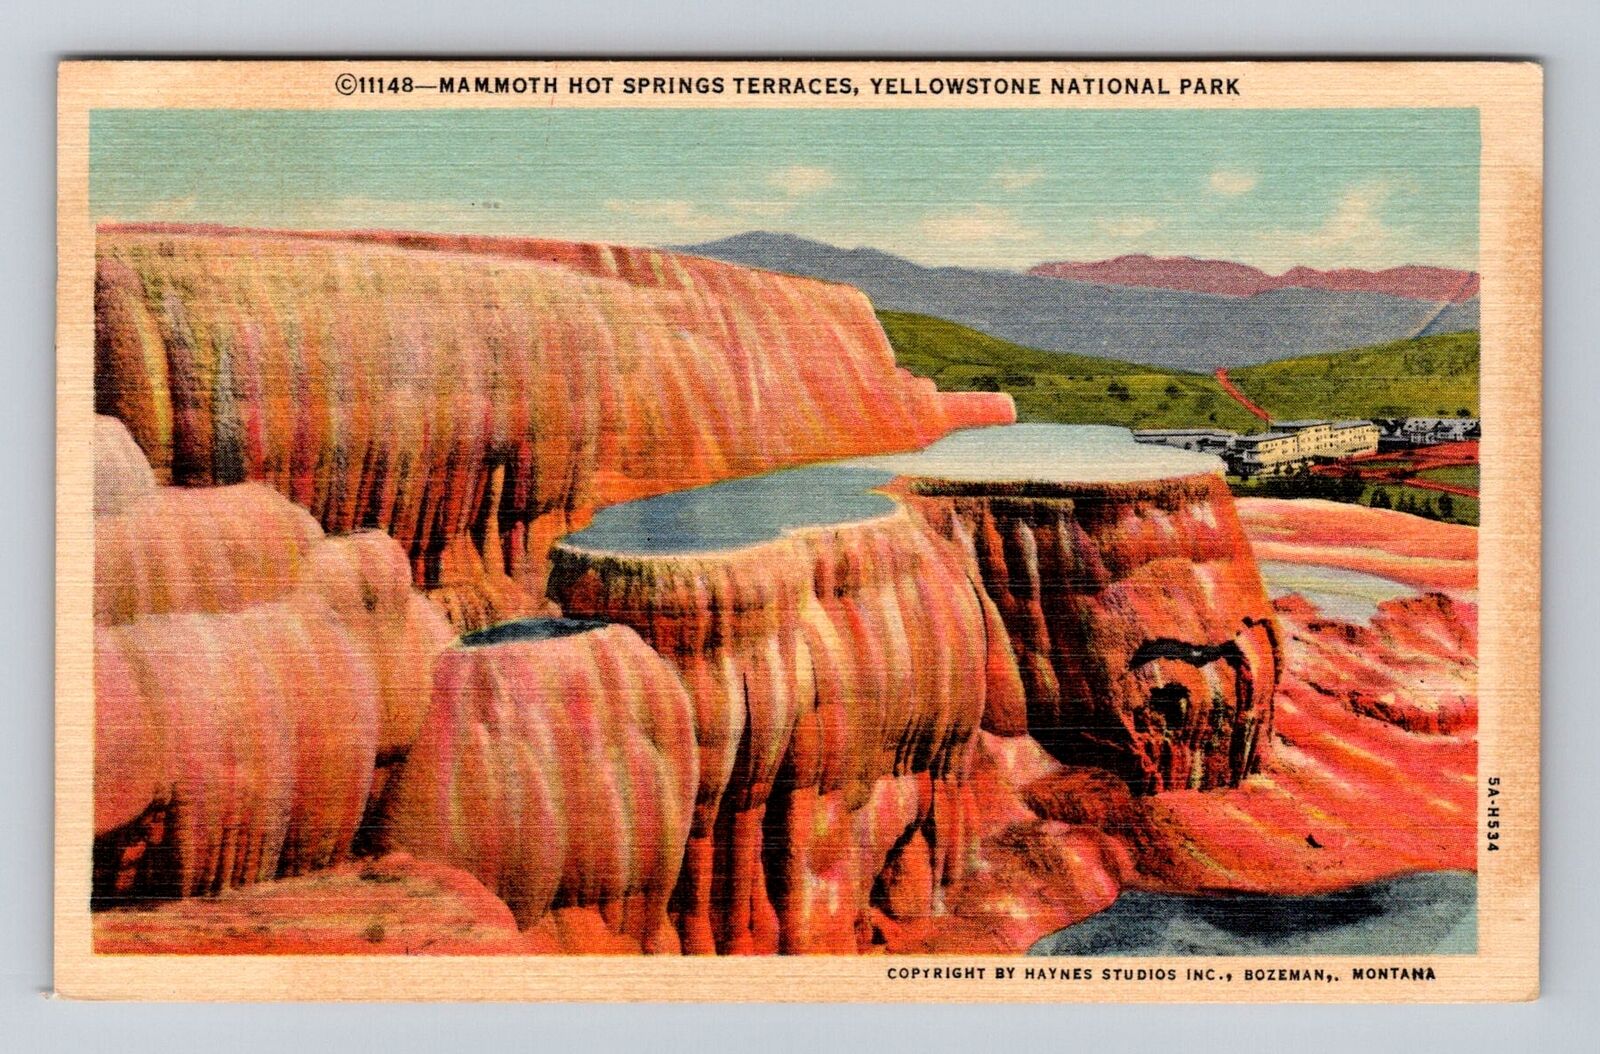 Yellowstone National Park, Mammoth Hot Springs, Series #11148 Vintage Postcard